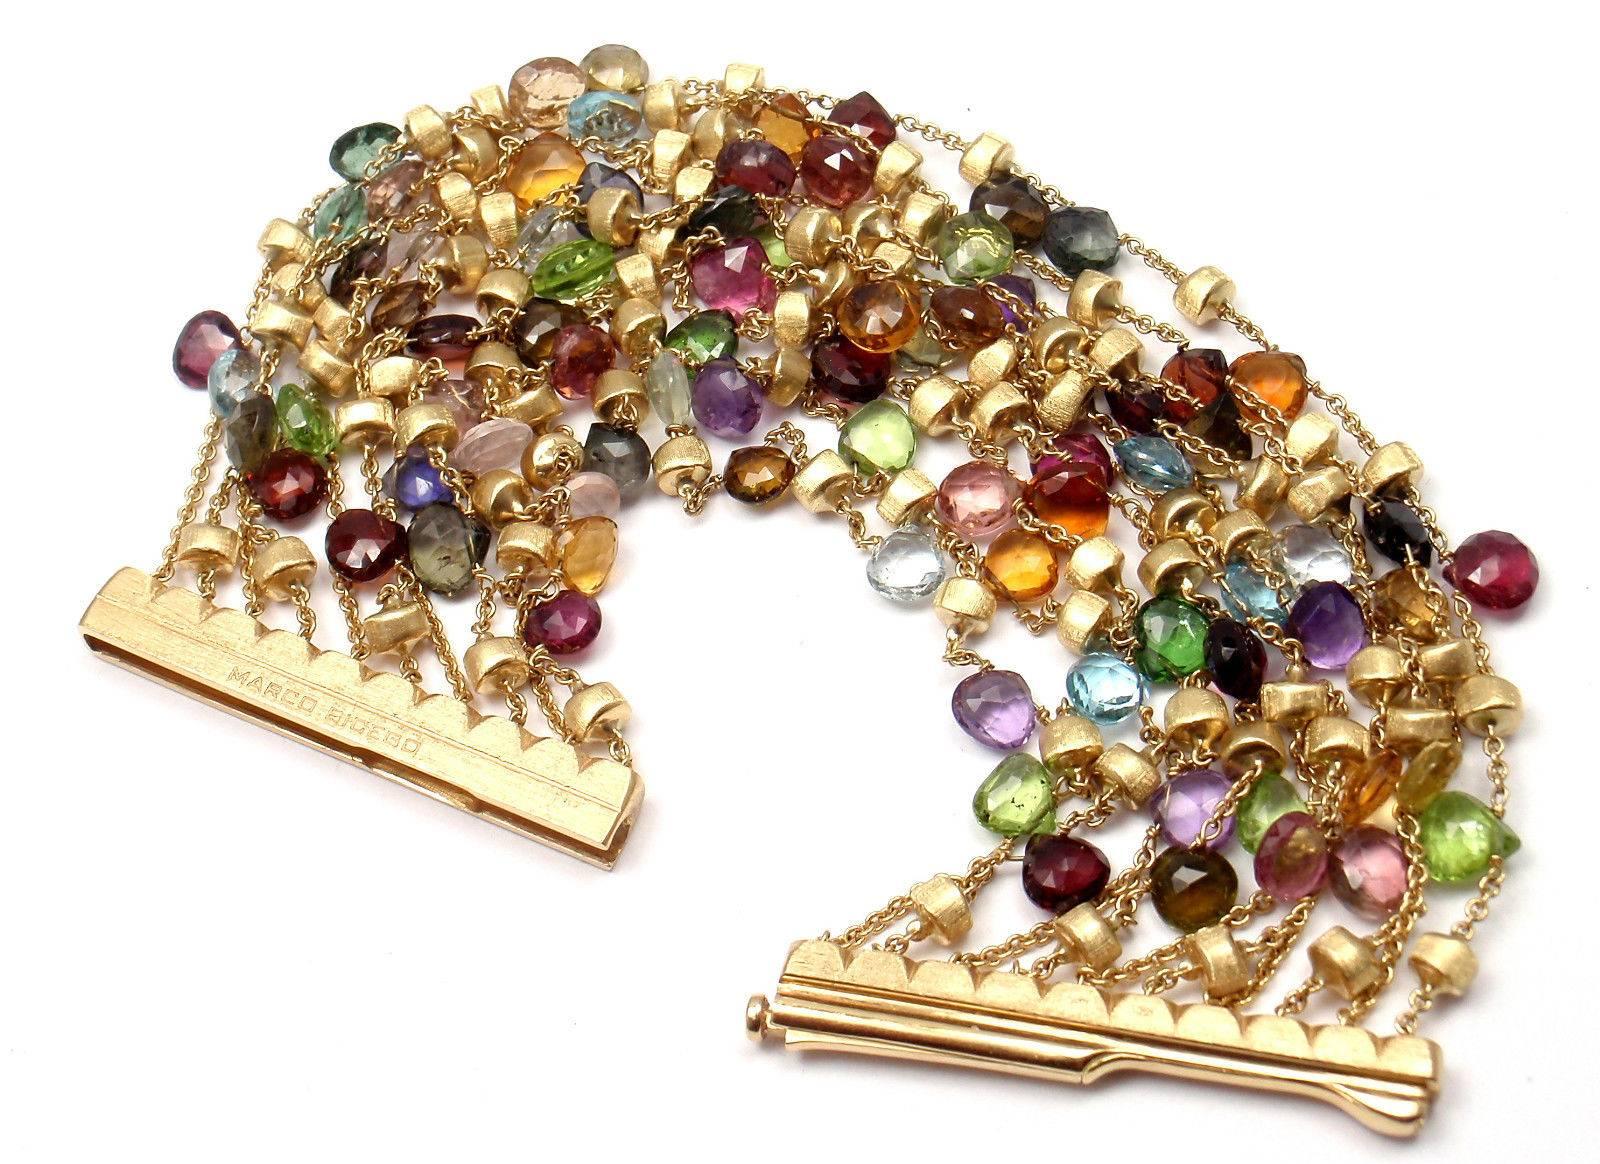 18k Yellow Gold Paradise Multicolor Gemstone 10 Strand Bracelet by Marco Bicego.  
With Mixed semi-precious colored stones
 
Details: 
Length: 7